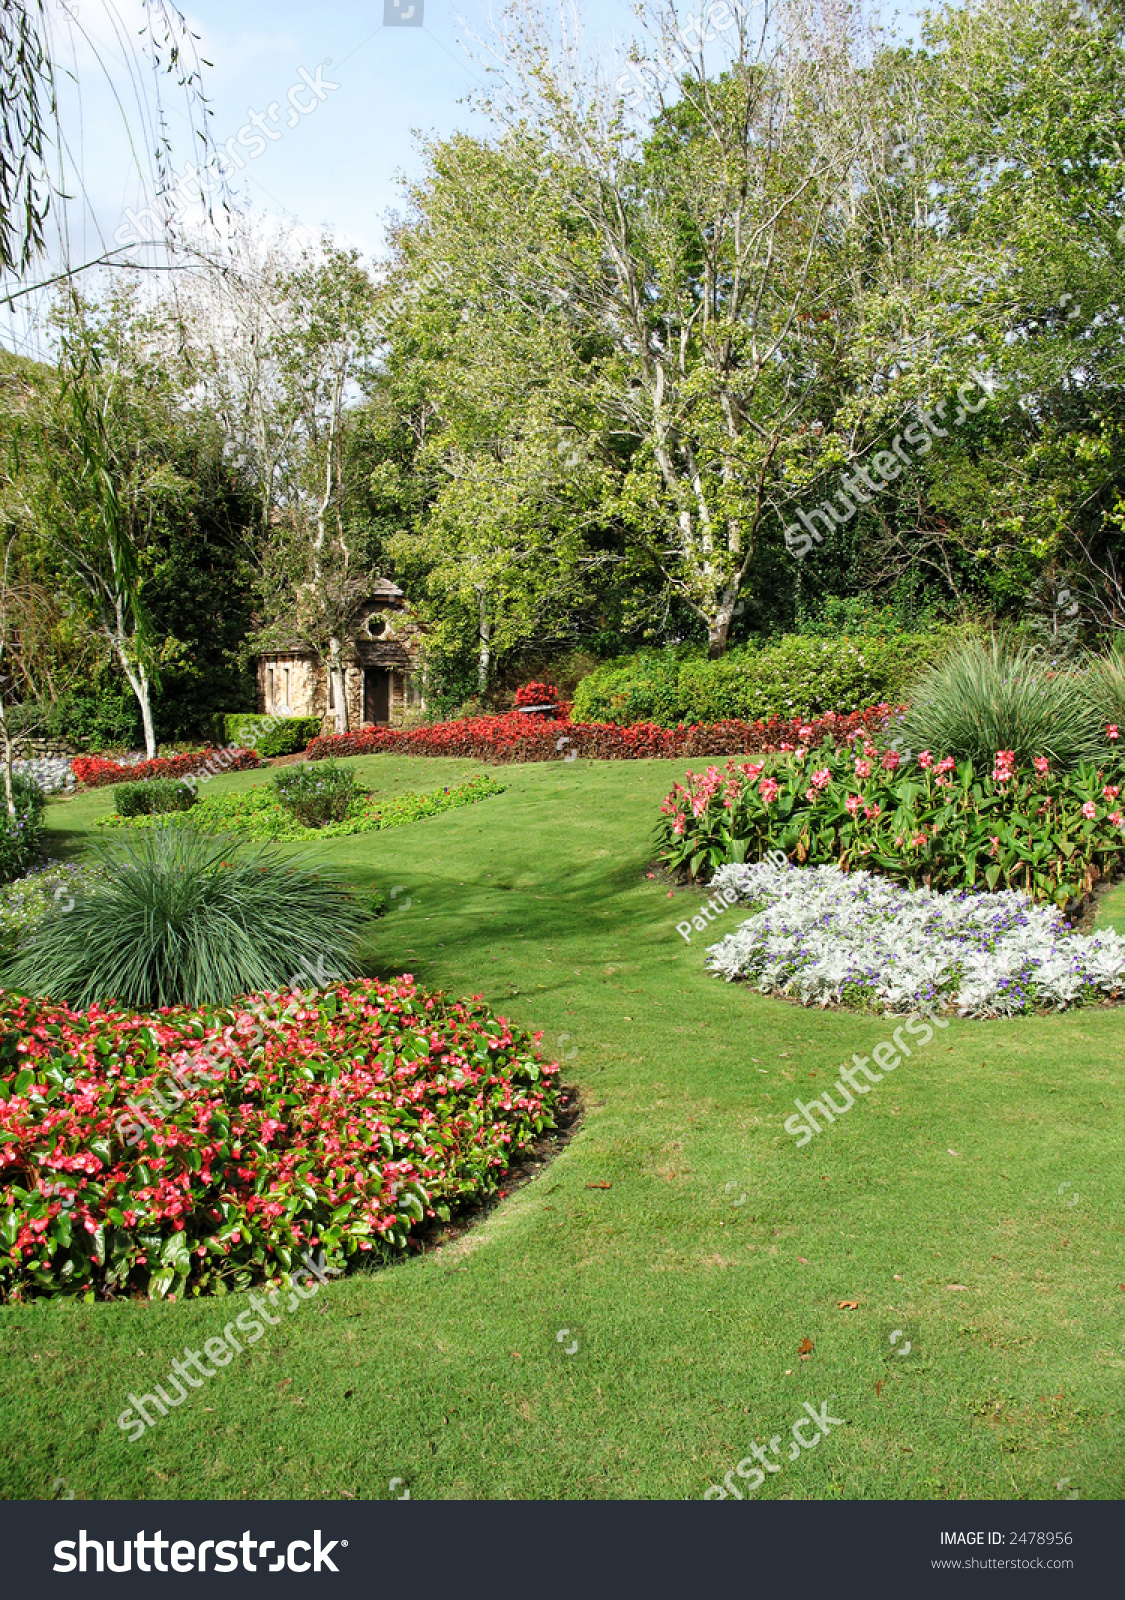 small stone hut sits formal garden stock photo (edit now) 2478956